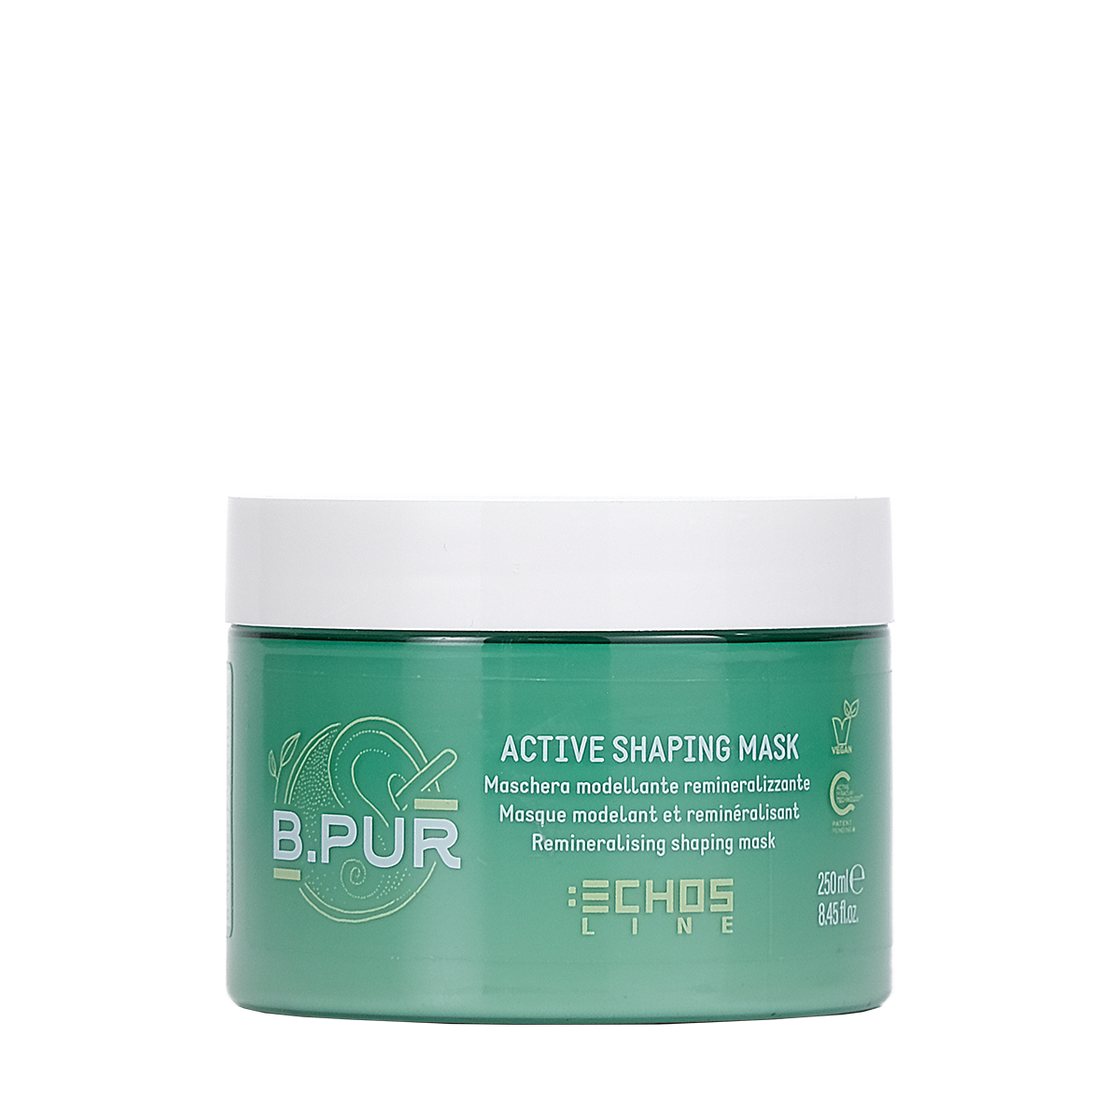 ECHOS B.PUR ACTIVE SHAPING MASK NEW 250 ML